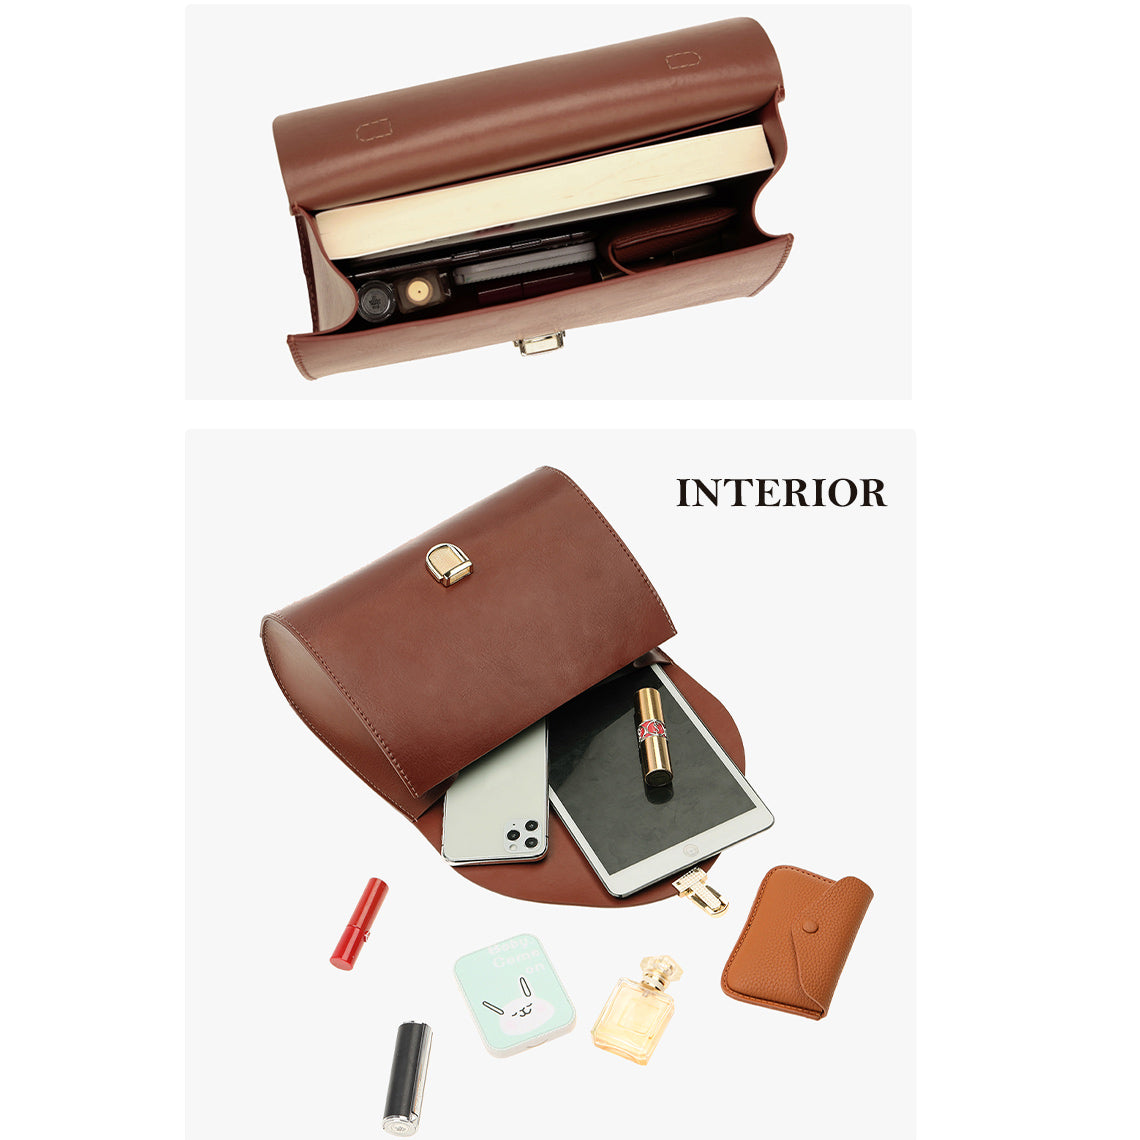 POPSEWING® Leather Vintage Top Handle Crossbody Bag DIY Kit | Price Drop at Checkout